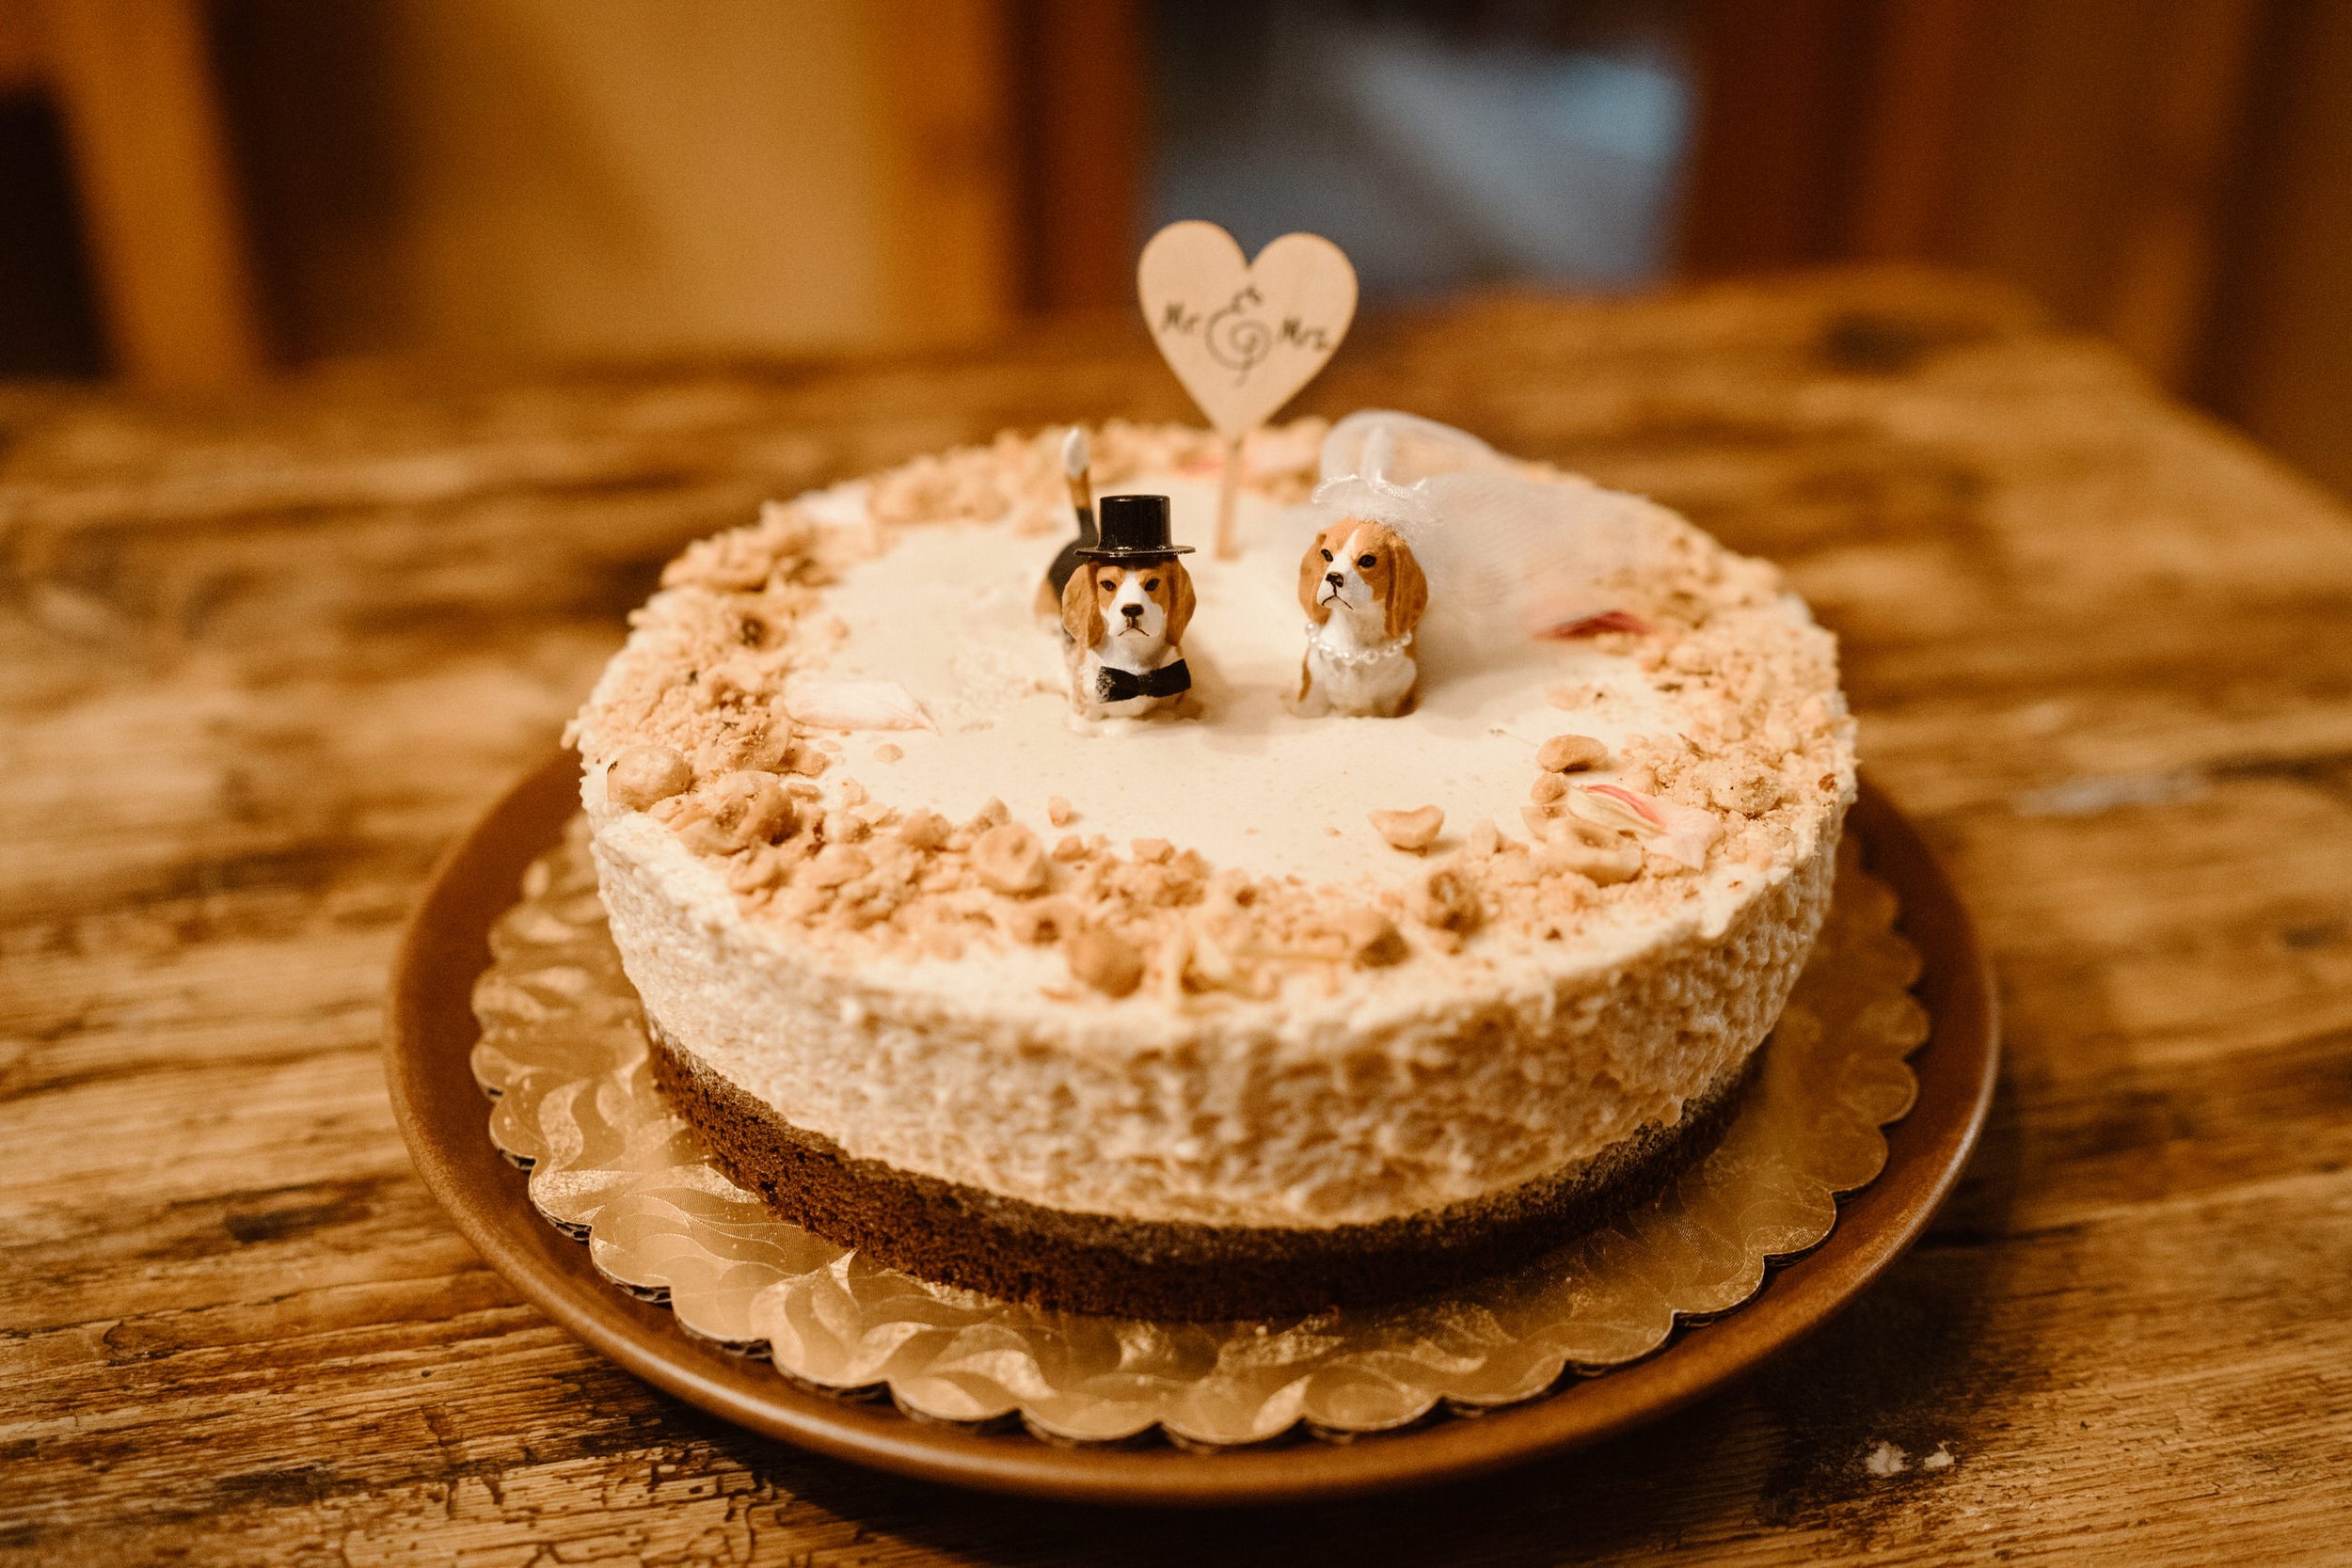 Wedding-in-the-Woods-Simple-Small-Cake-with-Funny-Beagle-Cake-Toppers (3).jpg